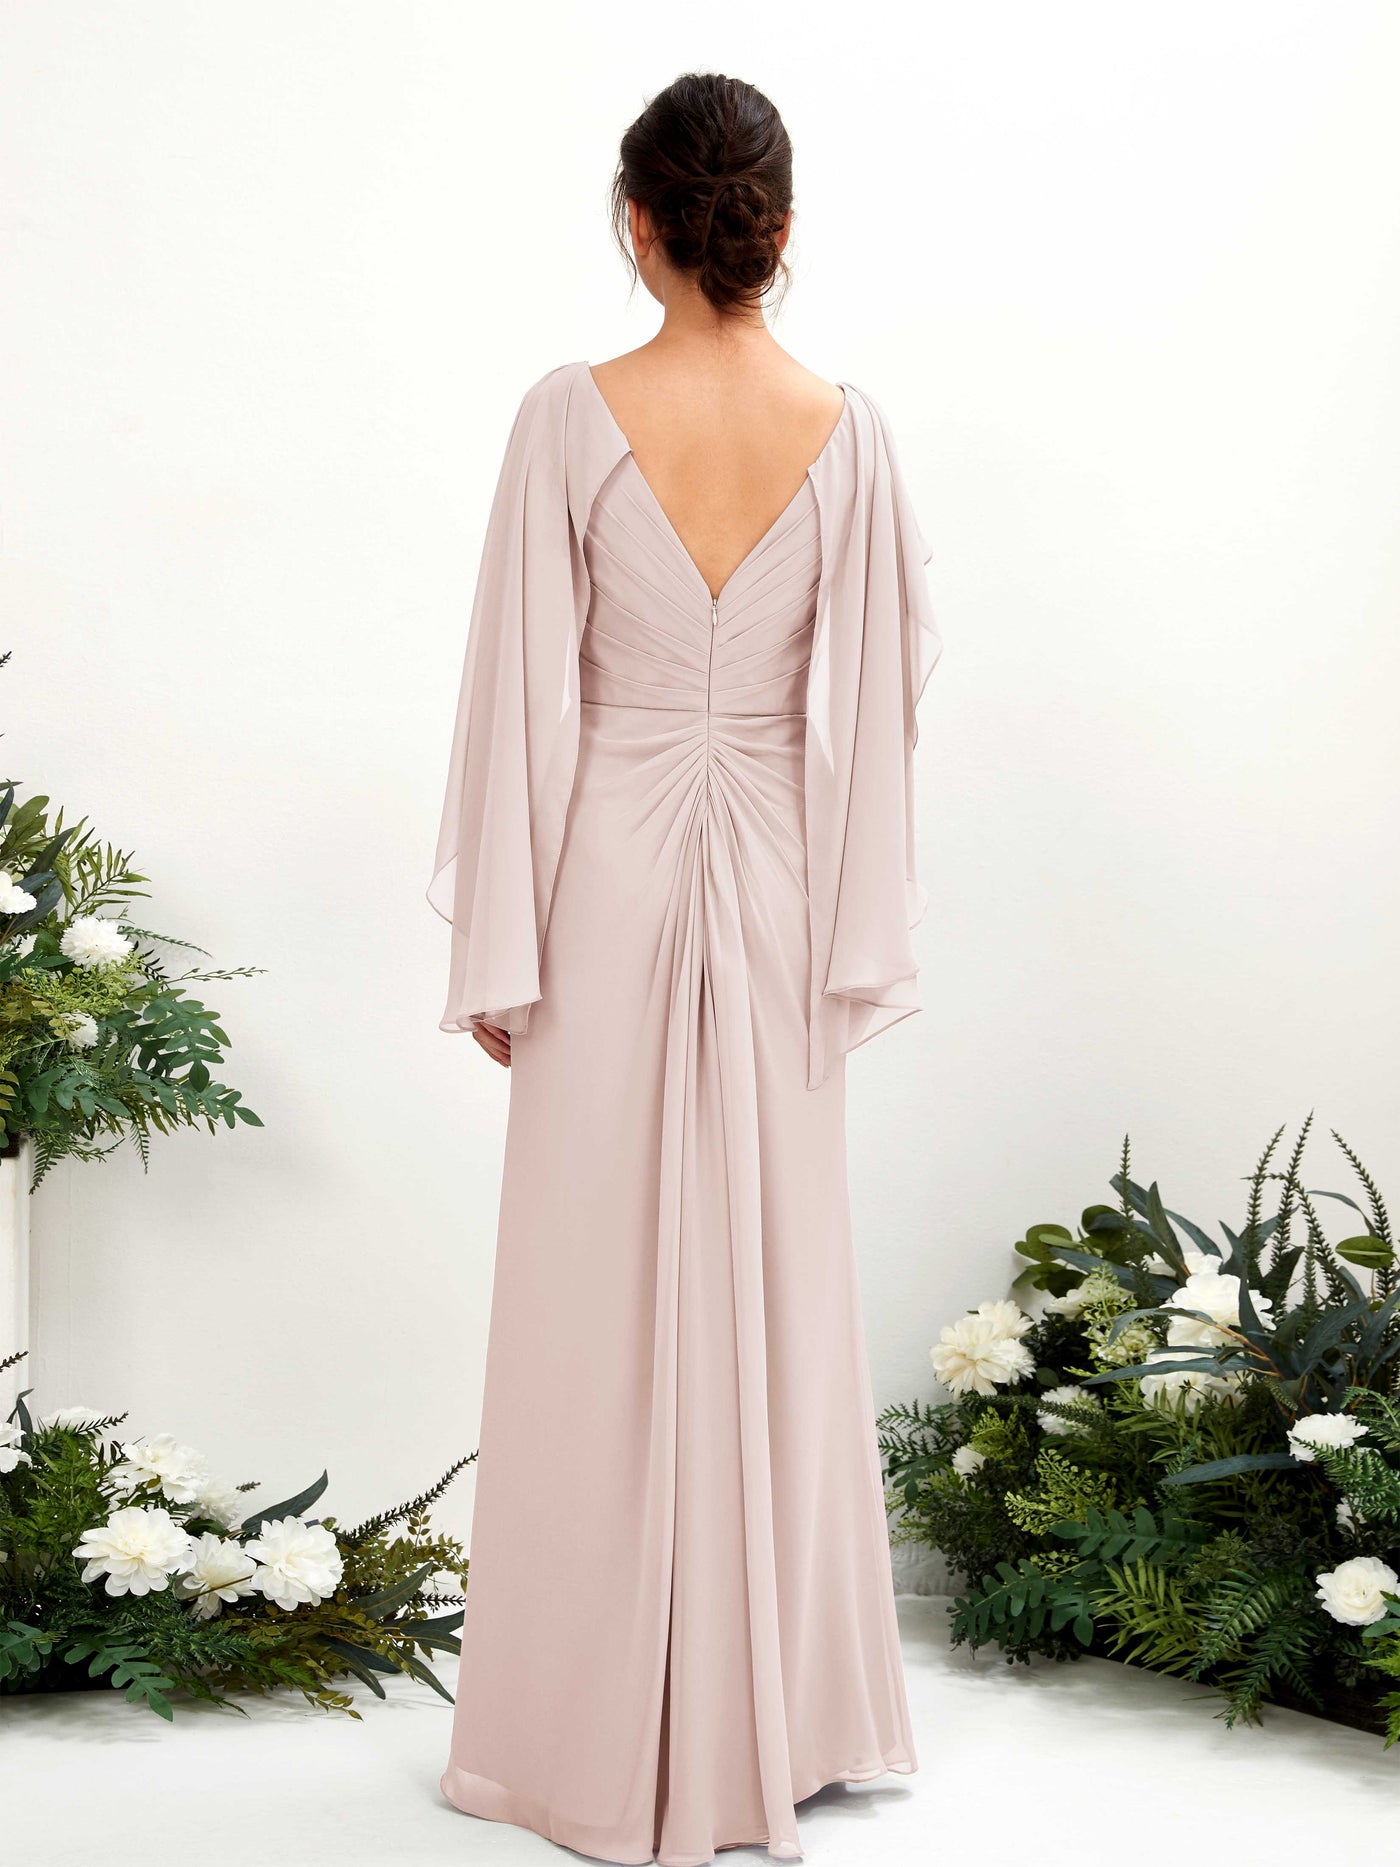 Biscotti Bridesmaid Dresses Bridesmaid Dress A-line Chiffon Straps Full Length Long Sleeves Wedding Party Dress (80220135)#color_biscotti